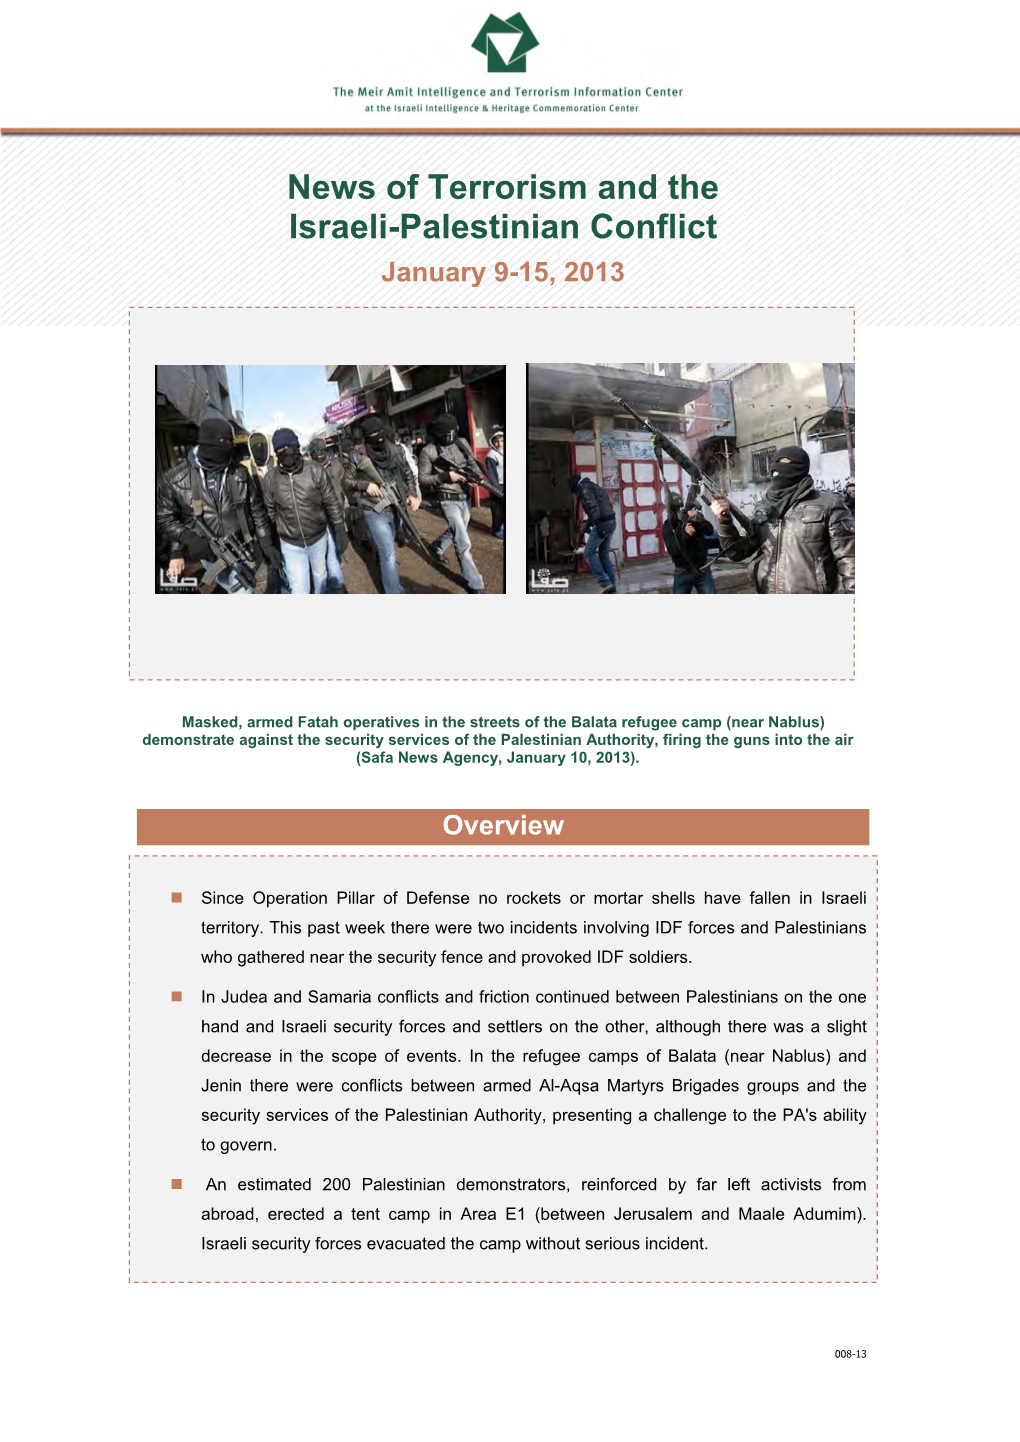 News of Terrorism and the Israeli-Palestinian Conflict January 9-15, 2013